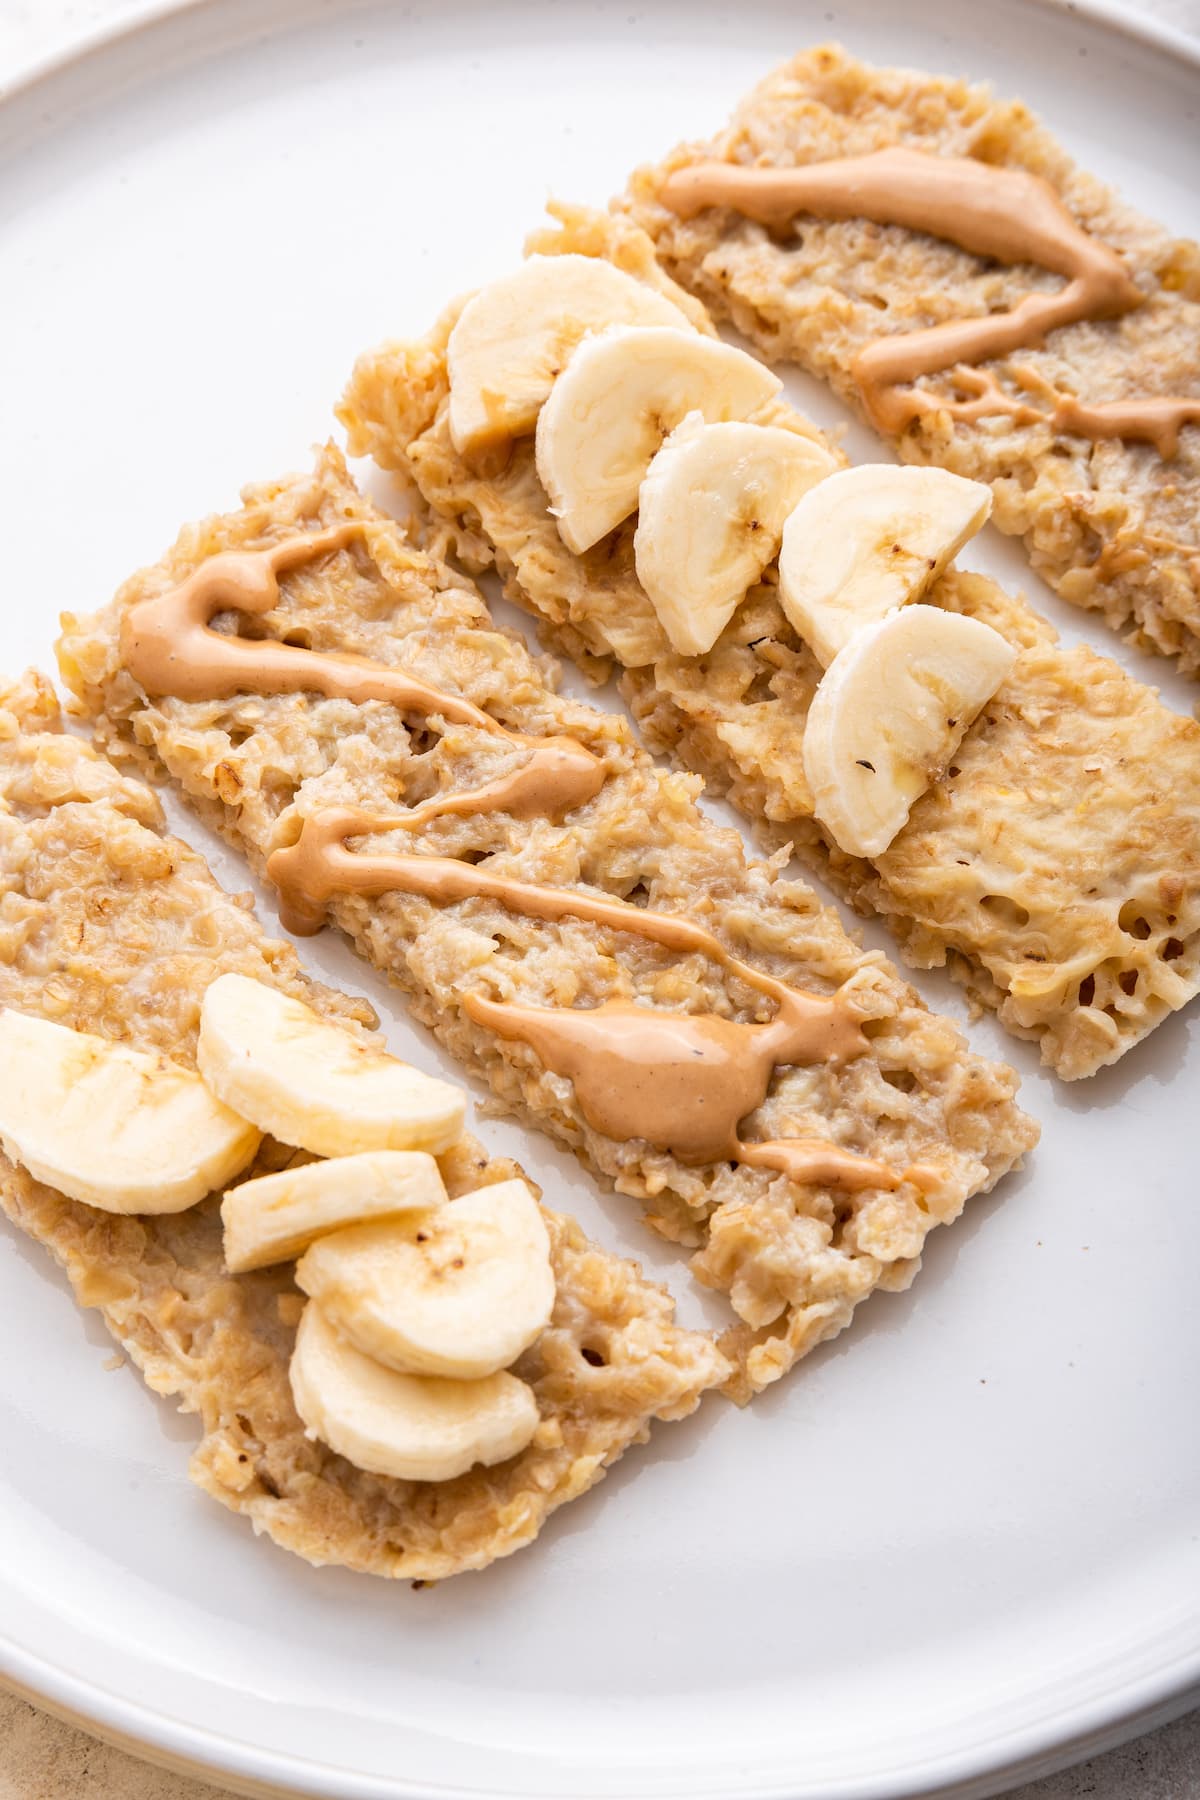 Four banana oatmeal fingers on a white plate topped with almond butter and fresh banana slices.